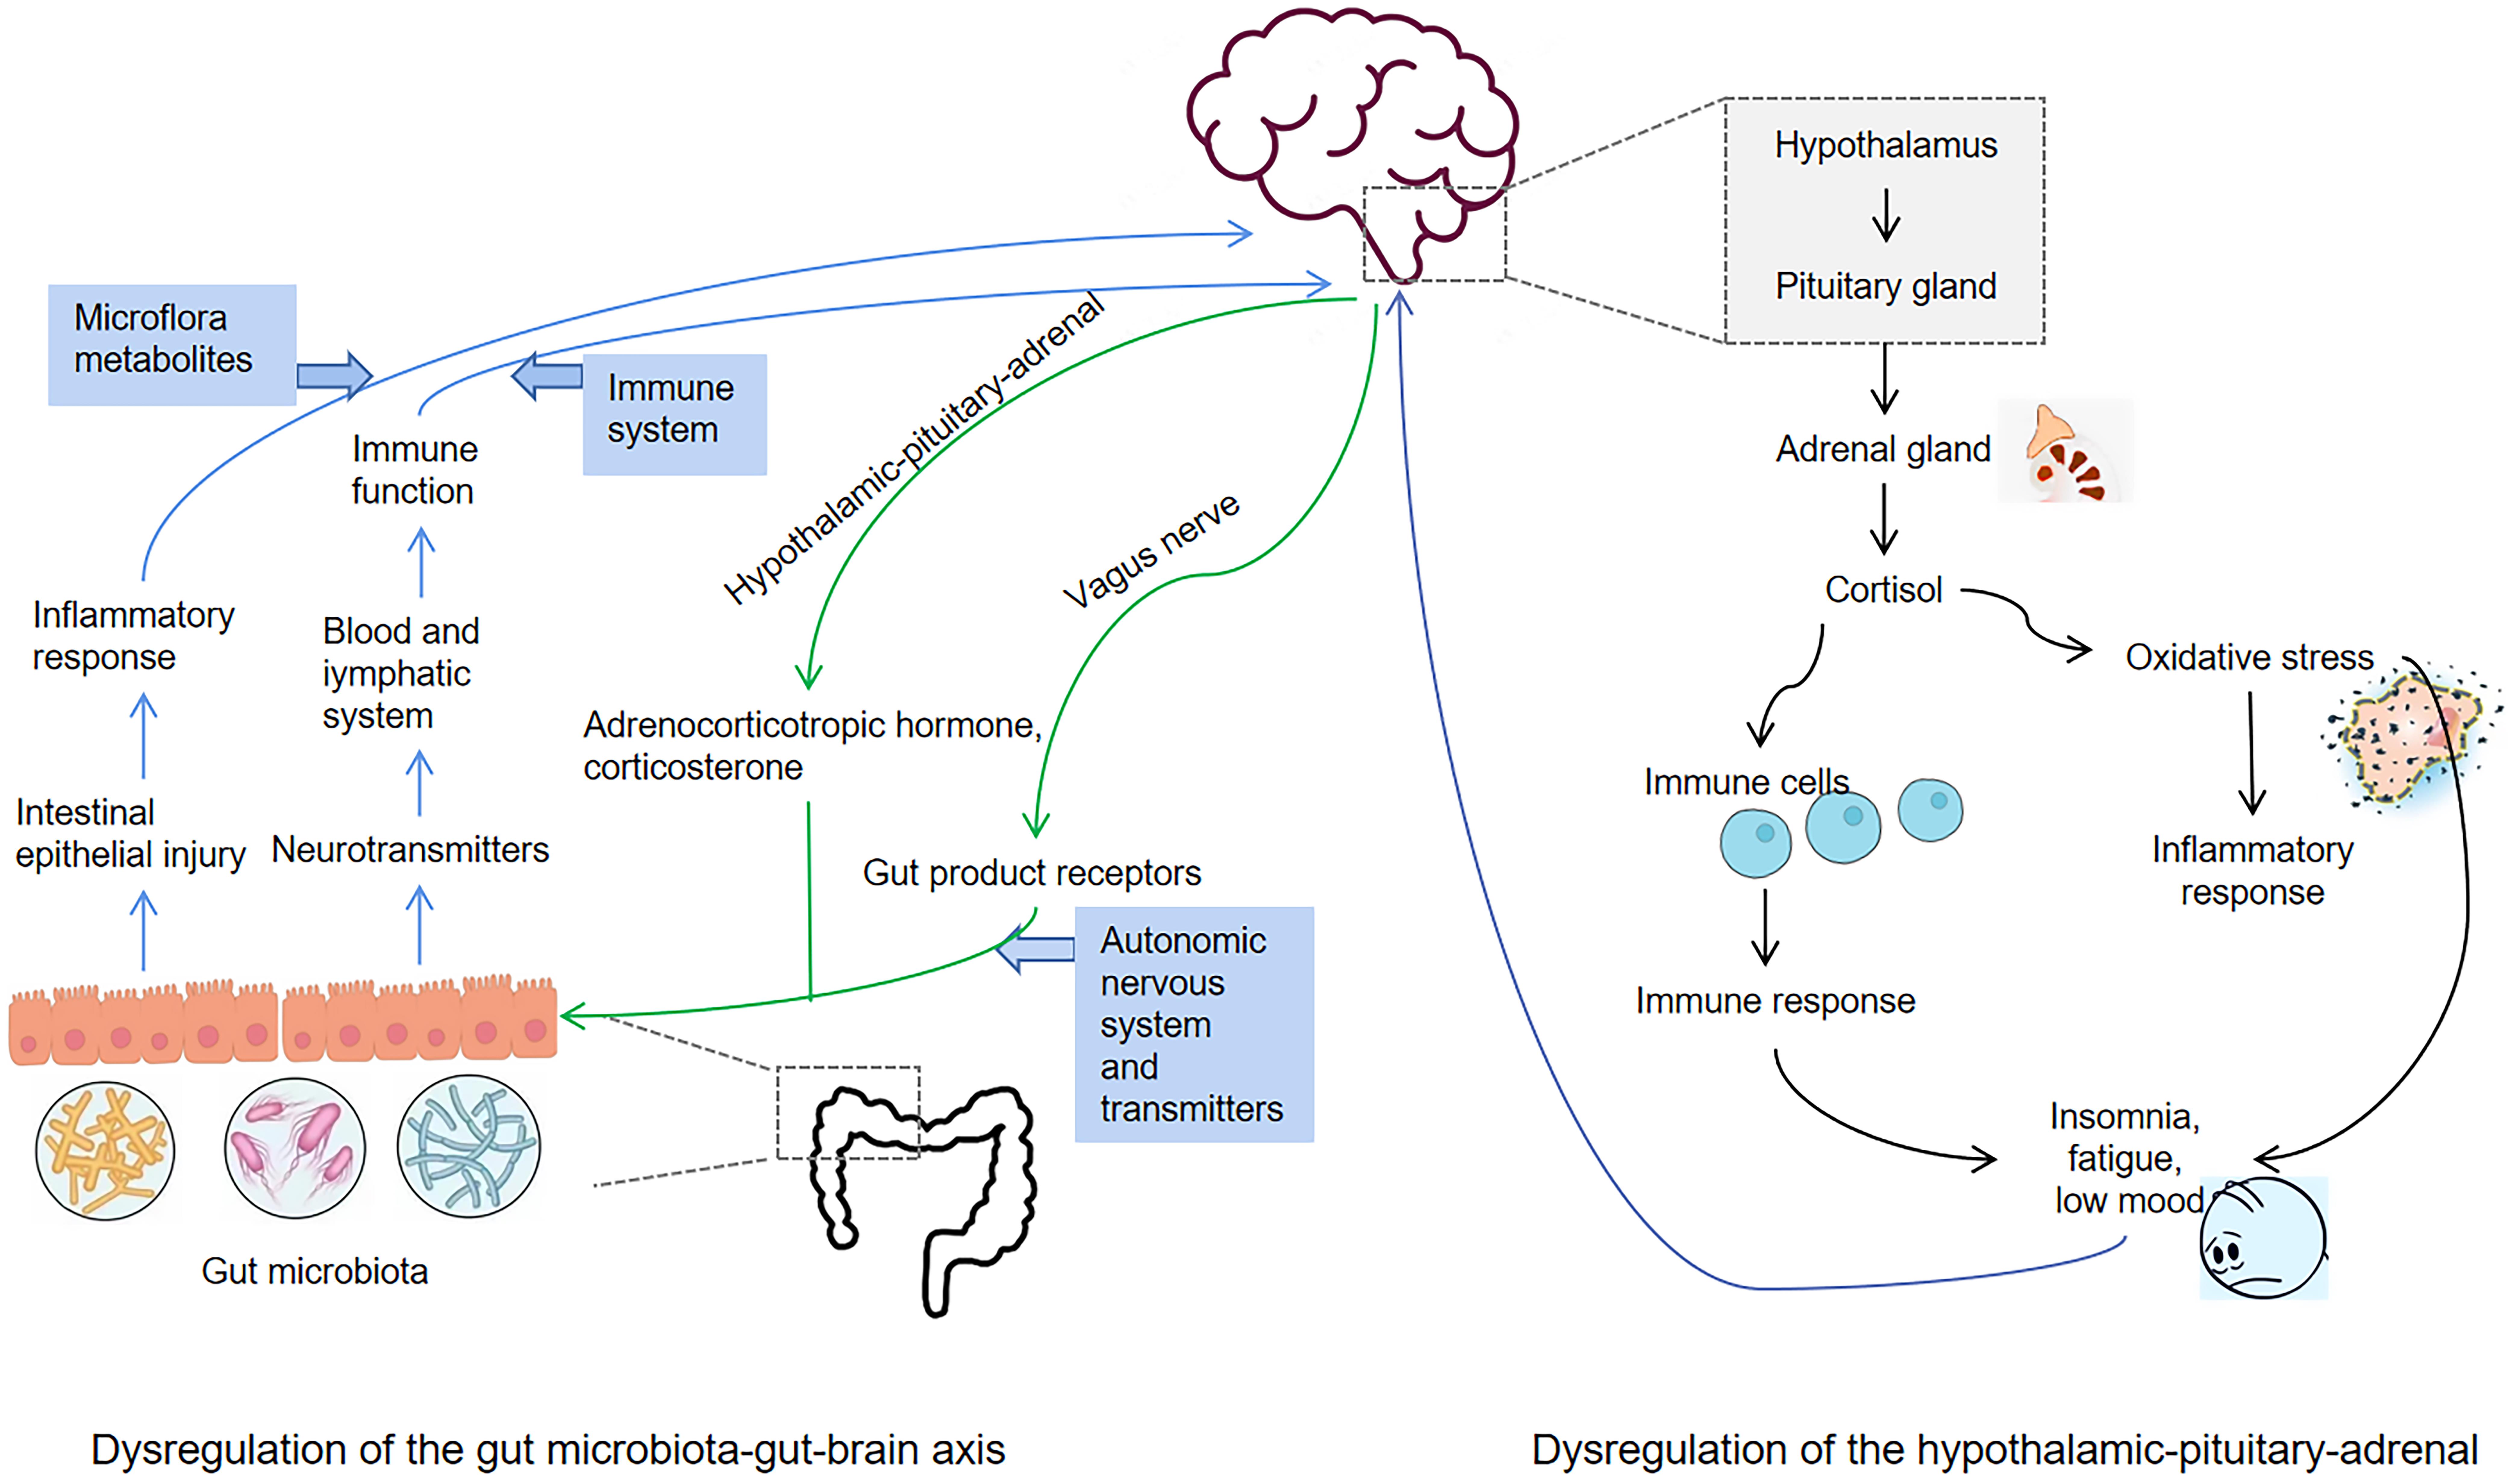 Pathogenesis of CRF in dysfunction of the hypothalamic pituitary-adrenal (HPA) axis, disruption of the gut and microbiota-gut-brain axis.